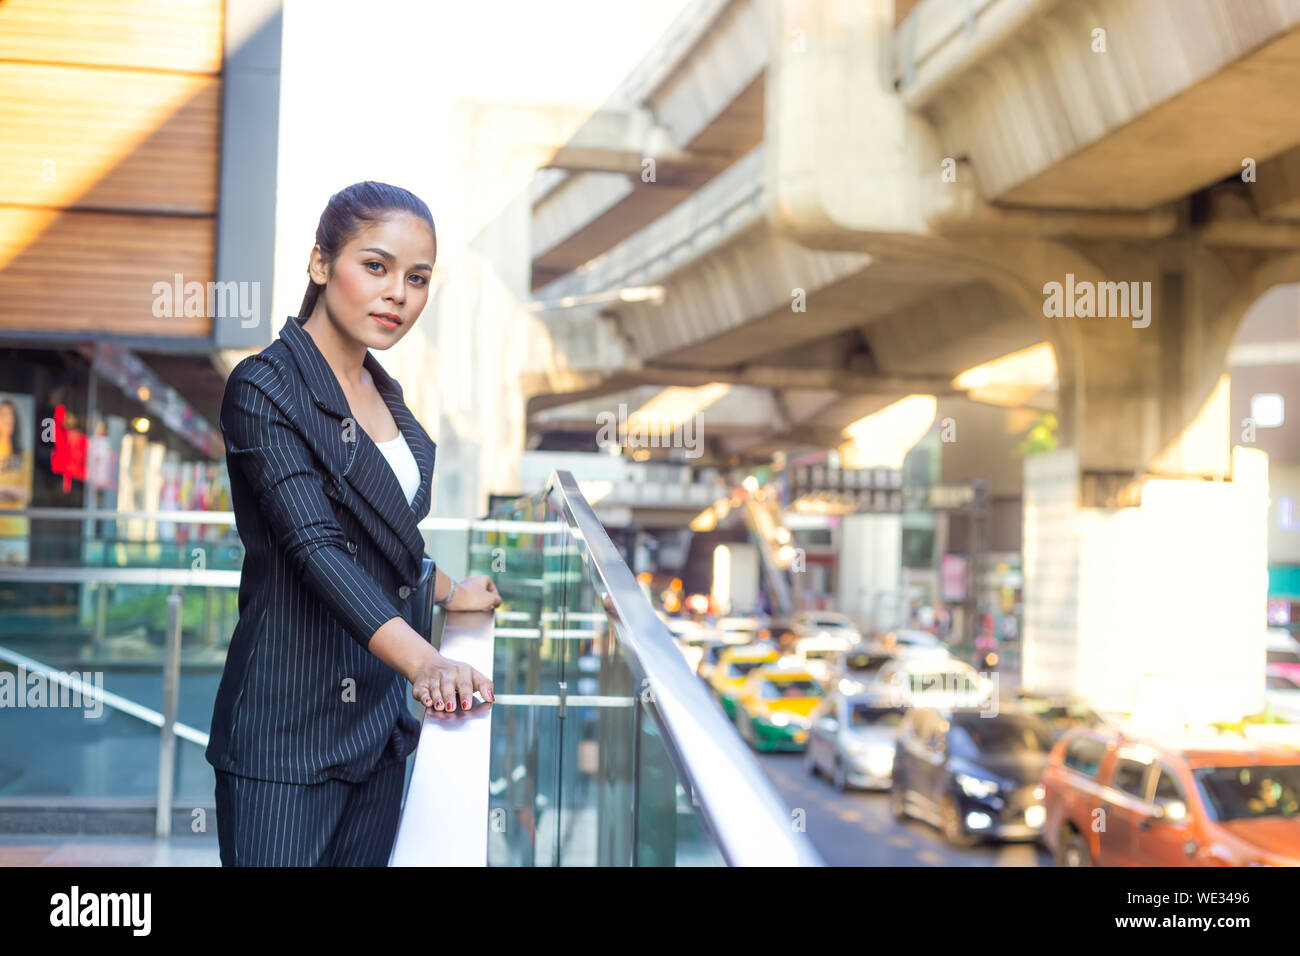 Asian Beautiful business woman in the evening light Stock Photo